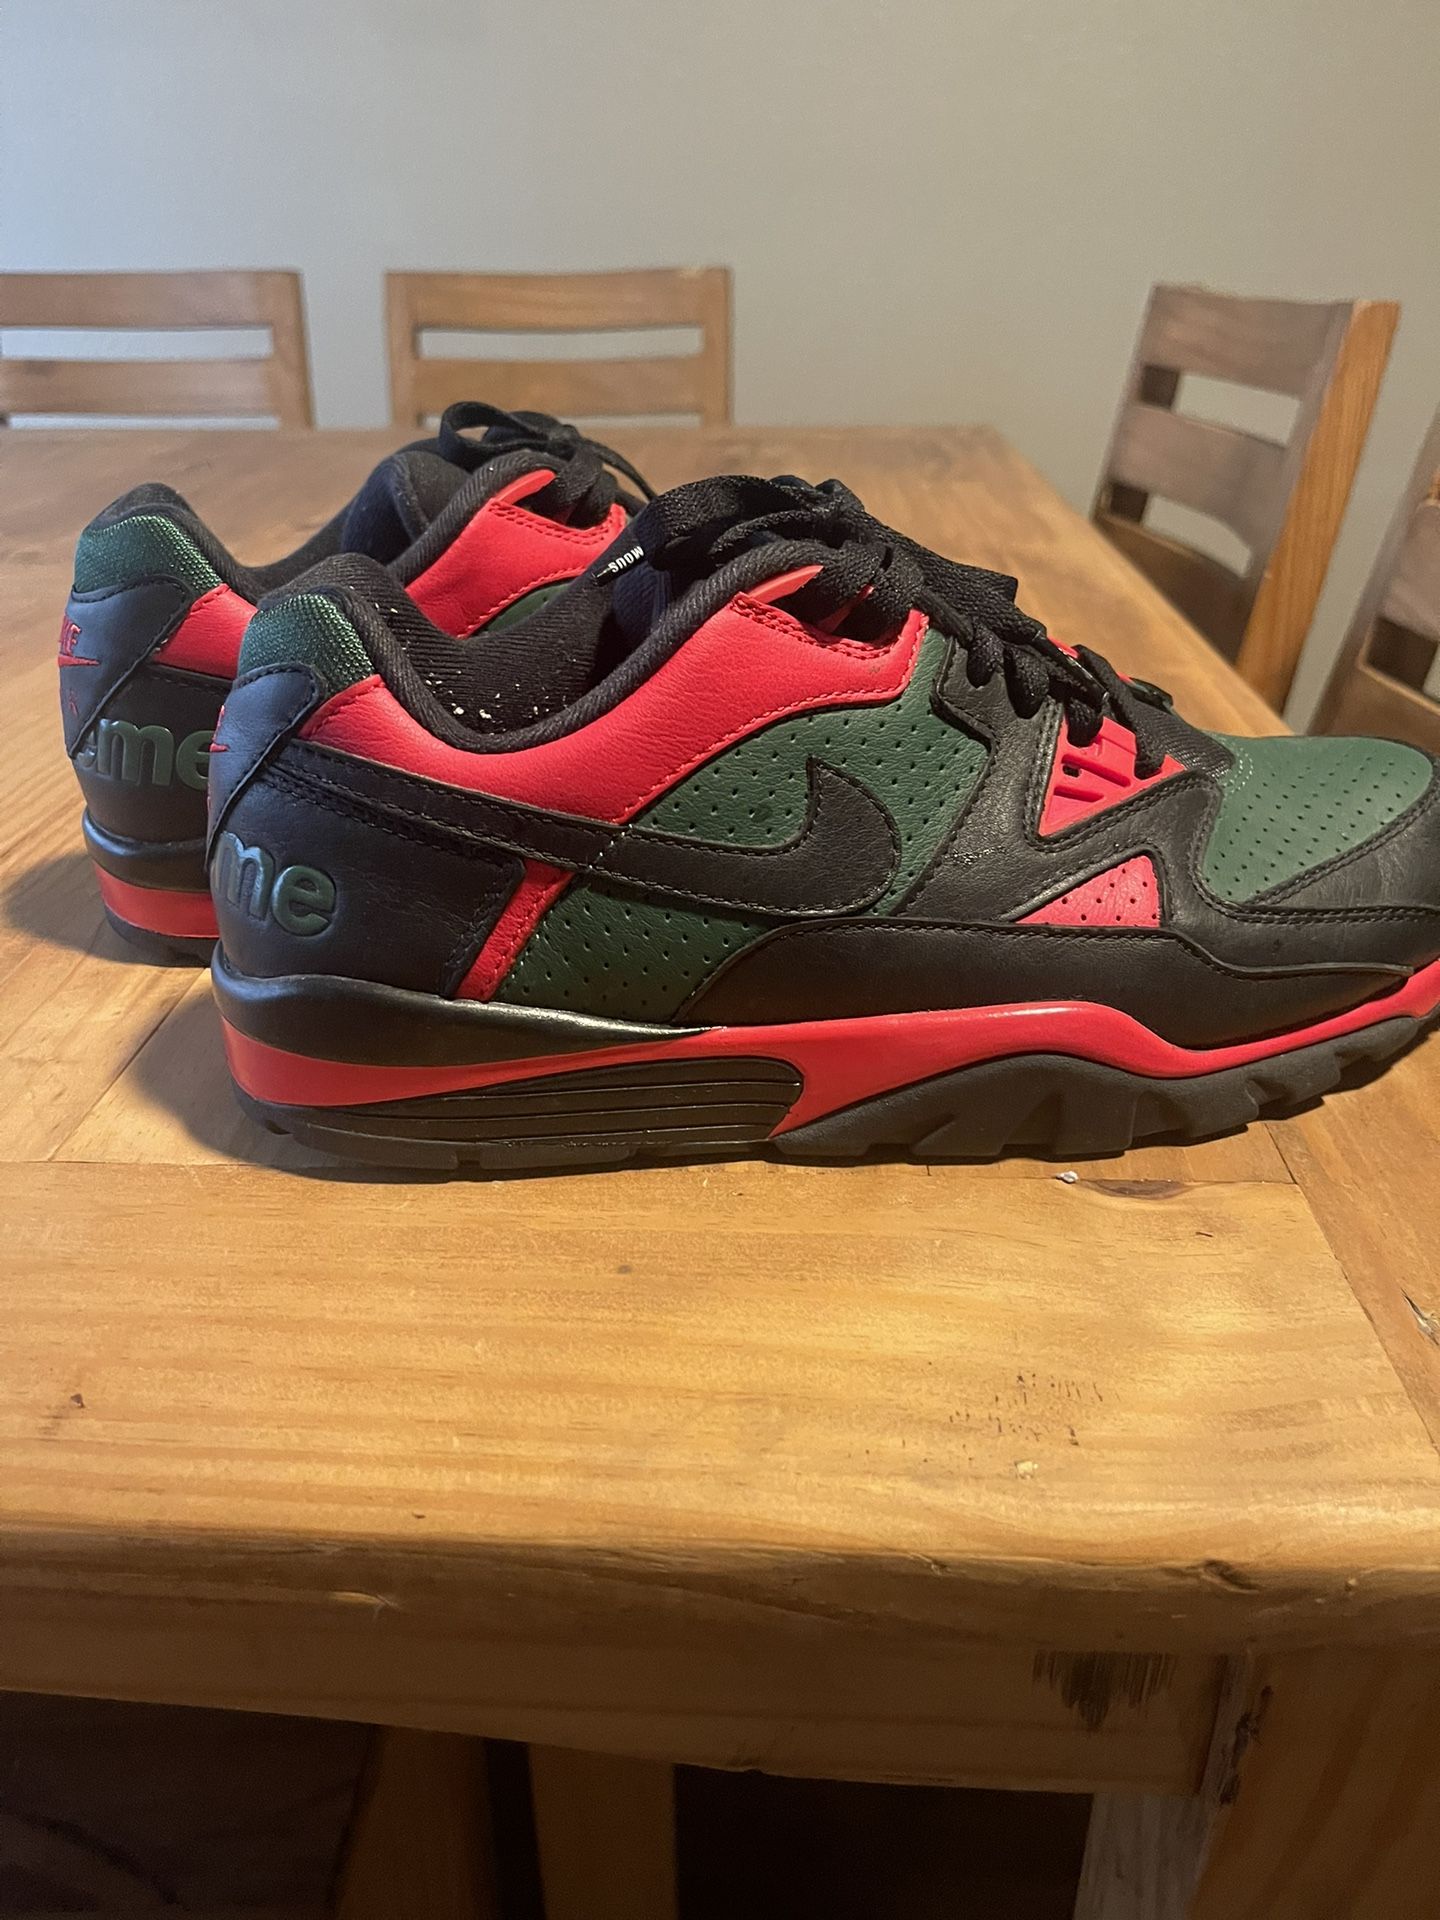 Nike Air x Supreme Green And Red Shoes 11 1/2 for Sale in